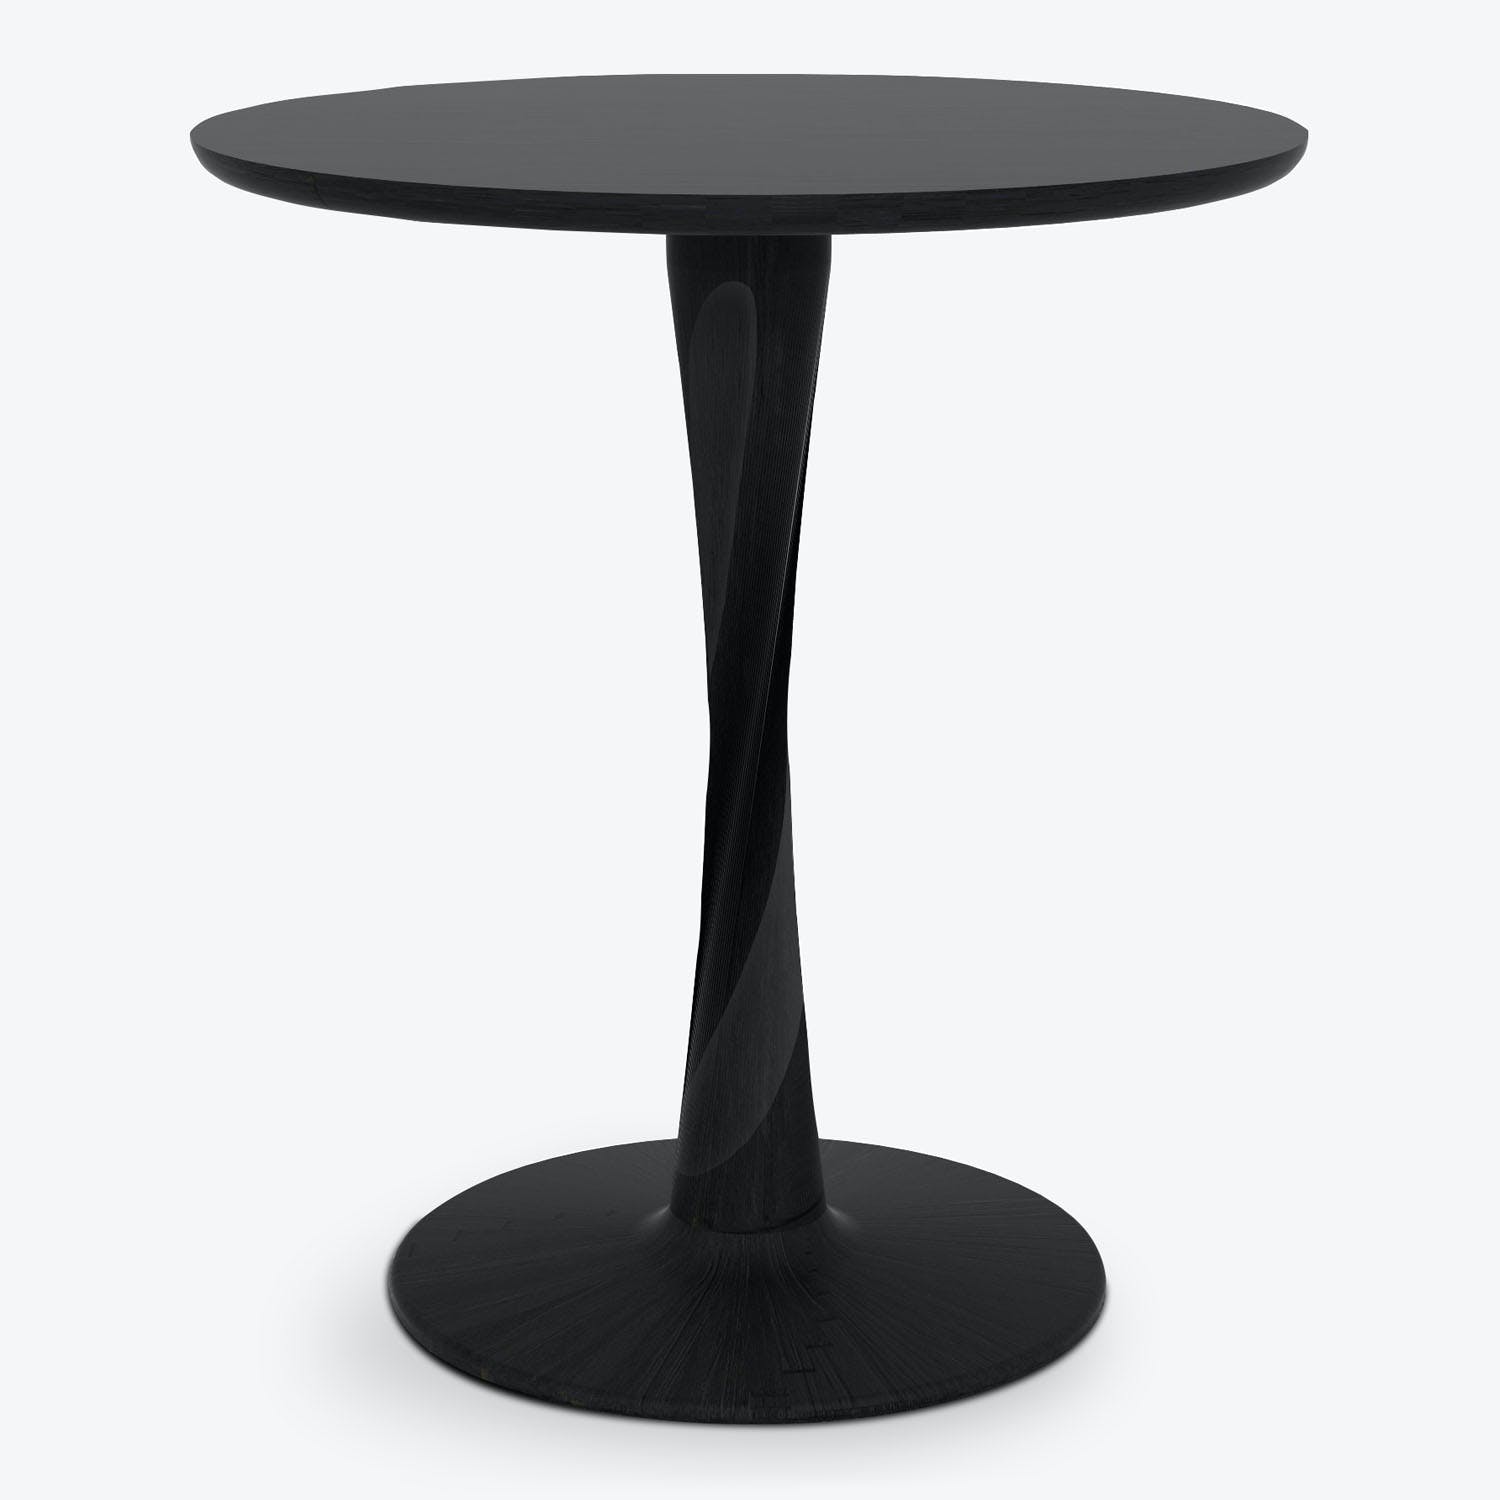 Contemporary black round table with elegant spiral support design.